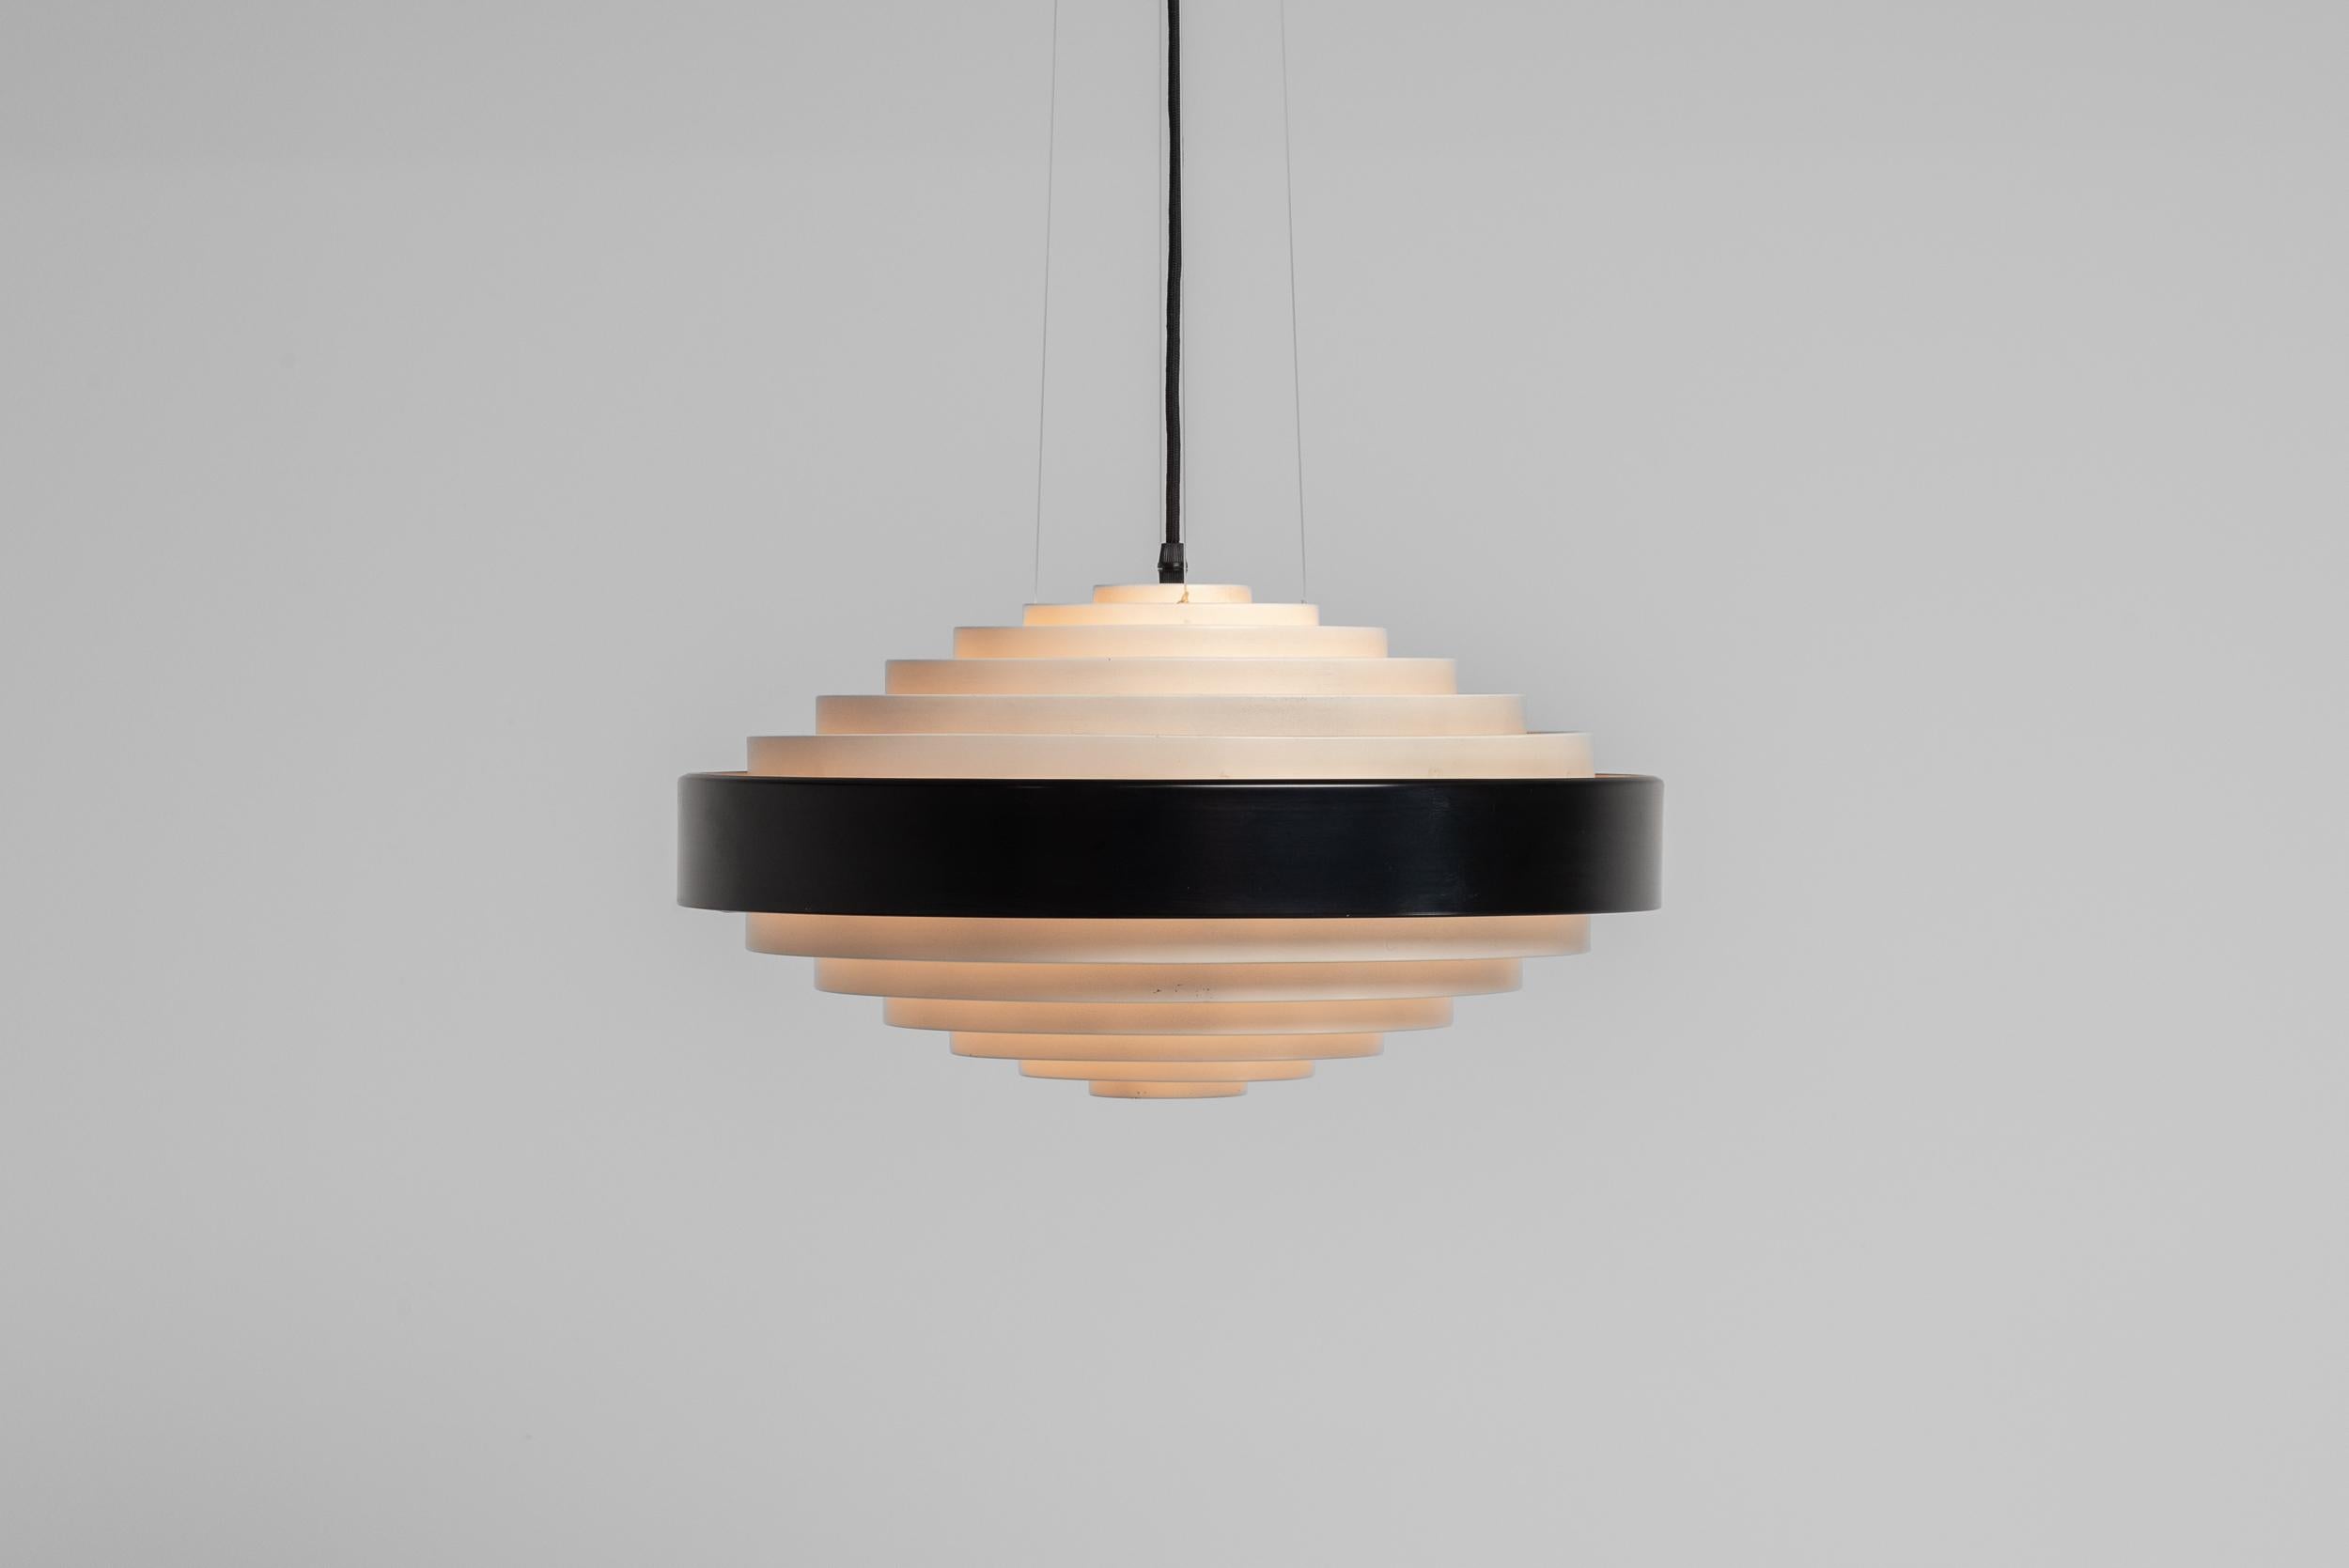 Wonderful 1088 chandelier designed by Bruno Gatta and manufactured by Stilnovo in Italy in 1959. This stunning ceiling pendant lamp is a nice example of innovative mid-century modern design. The lamp features a striking shade made of lacquered rings